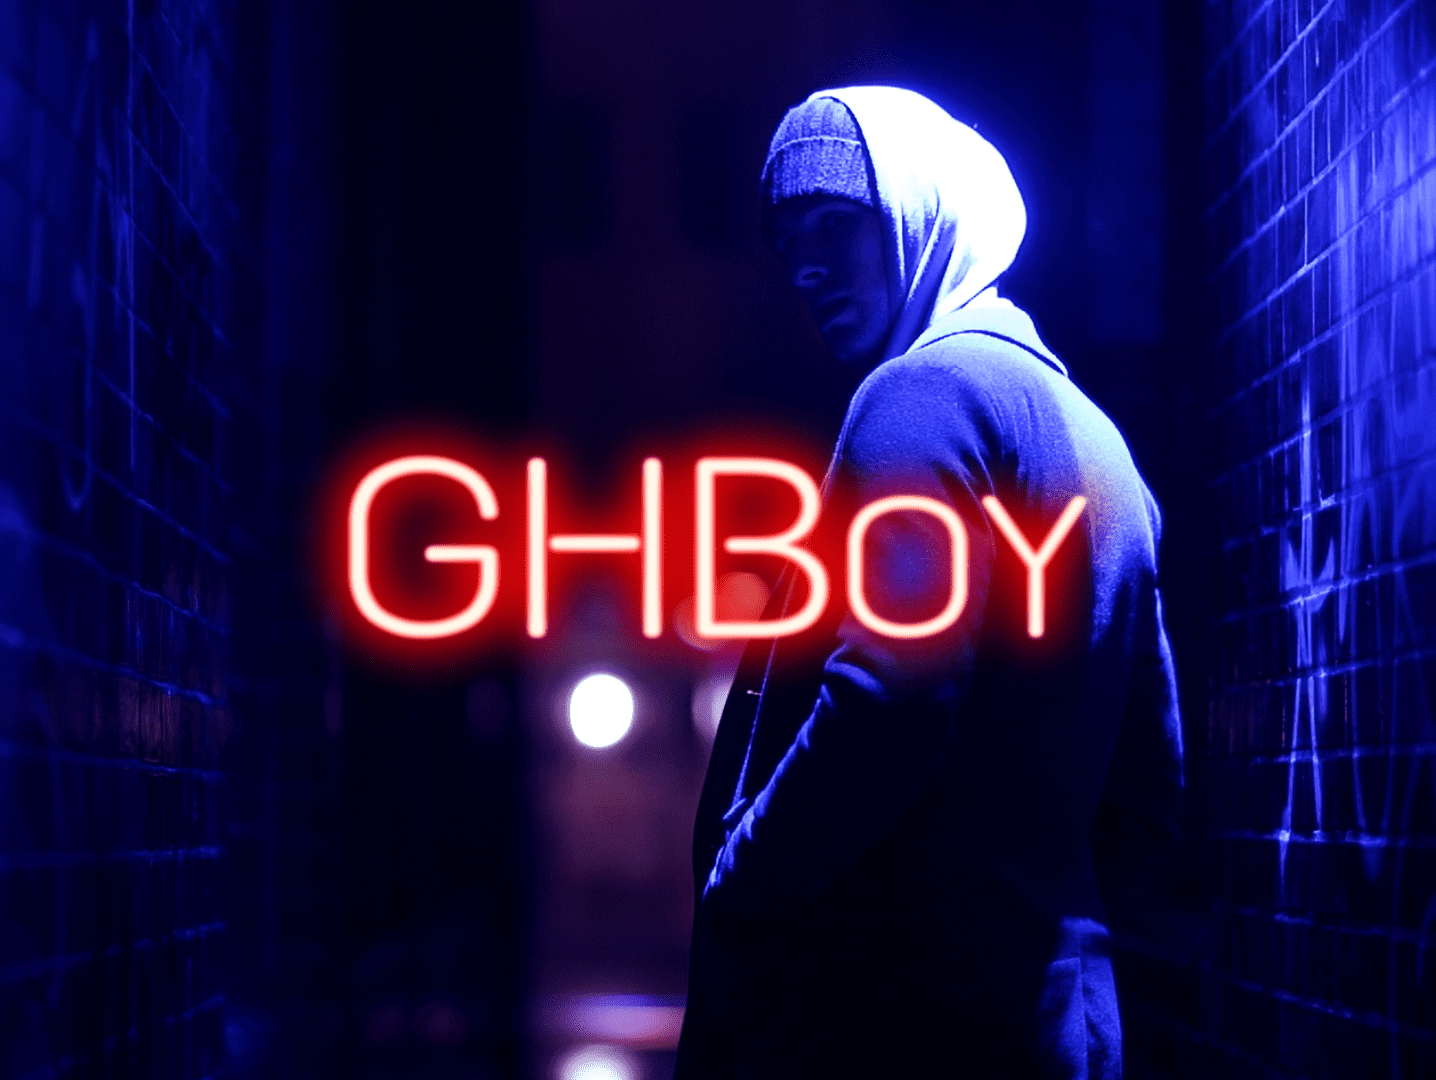 NEWS: Paul Harvard’s debut play GHBoy  will open at the Charing Cross Theatre in November